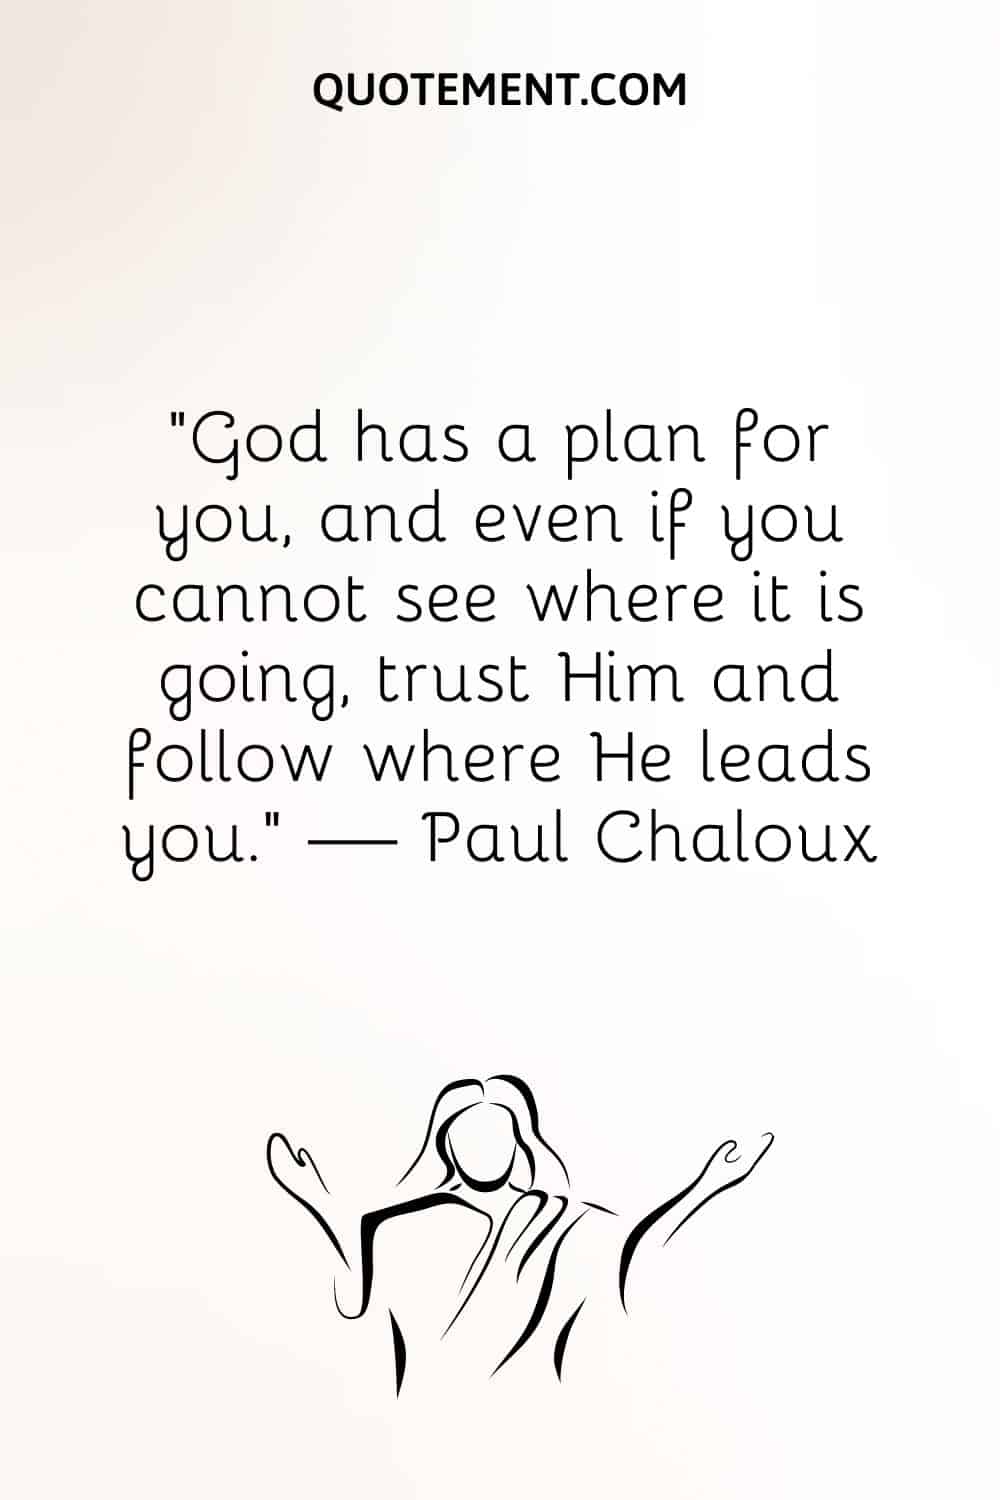 God has a plan for you, and even if you cannot see where it is going, trust Him and follow where He leads you.